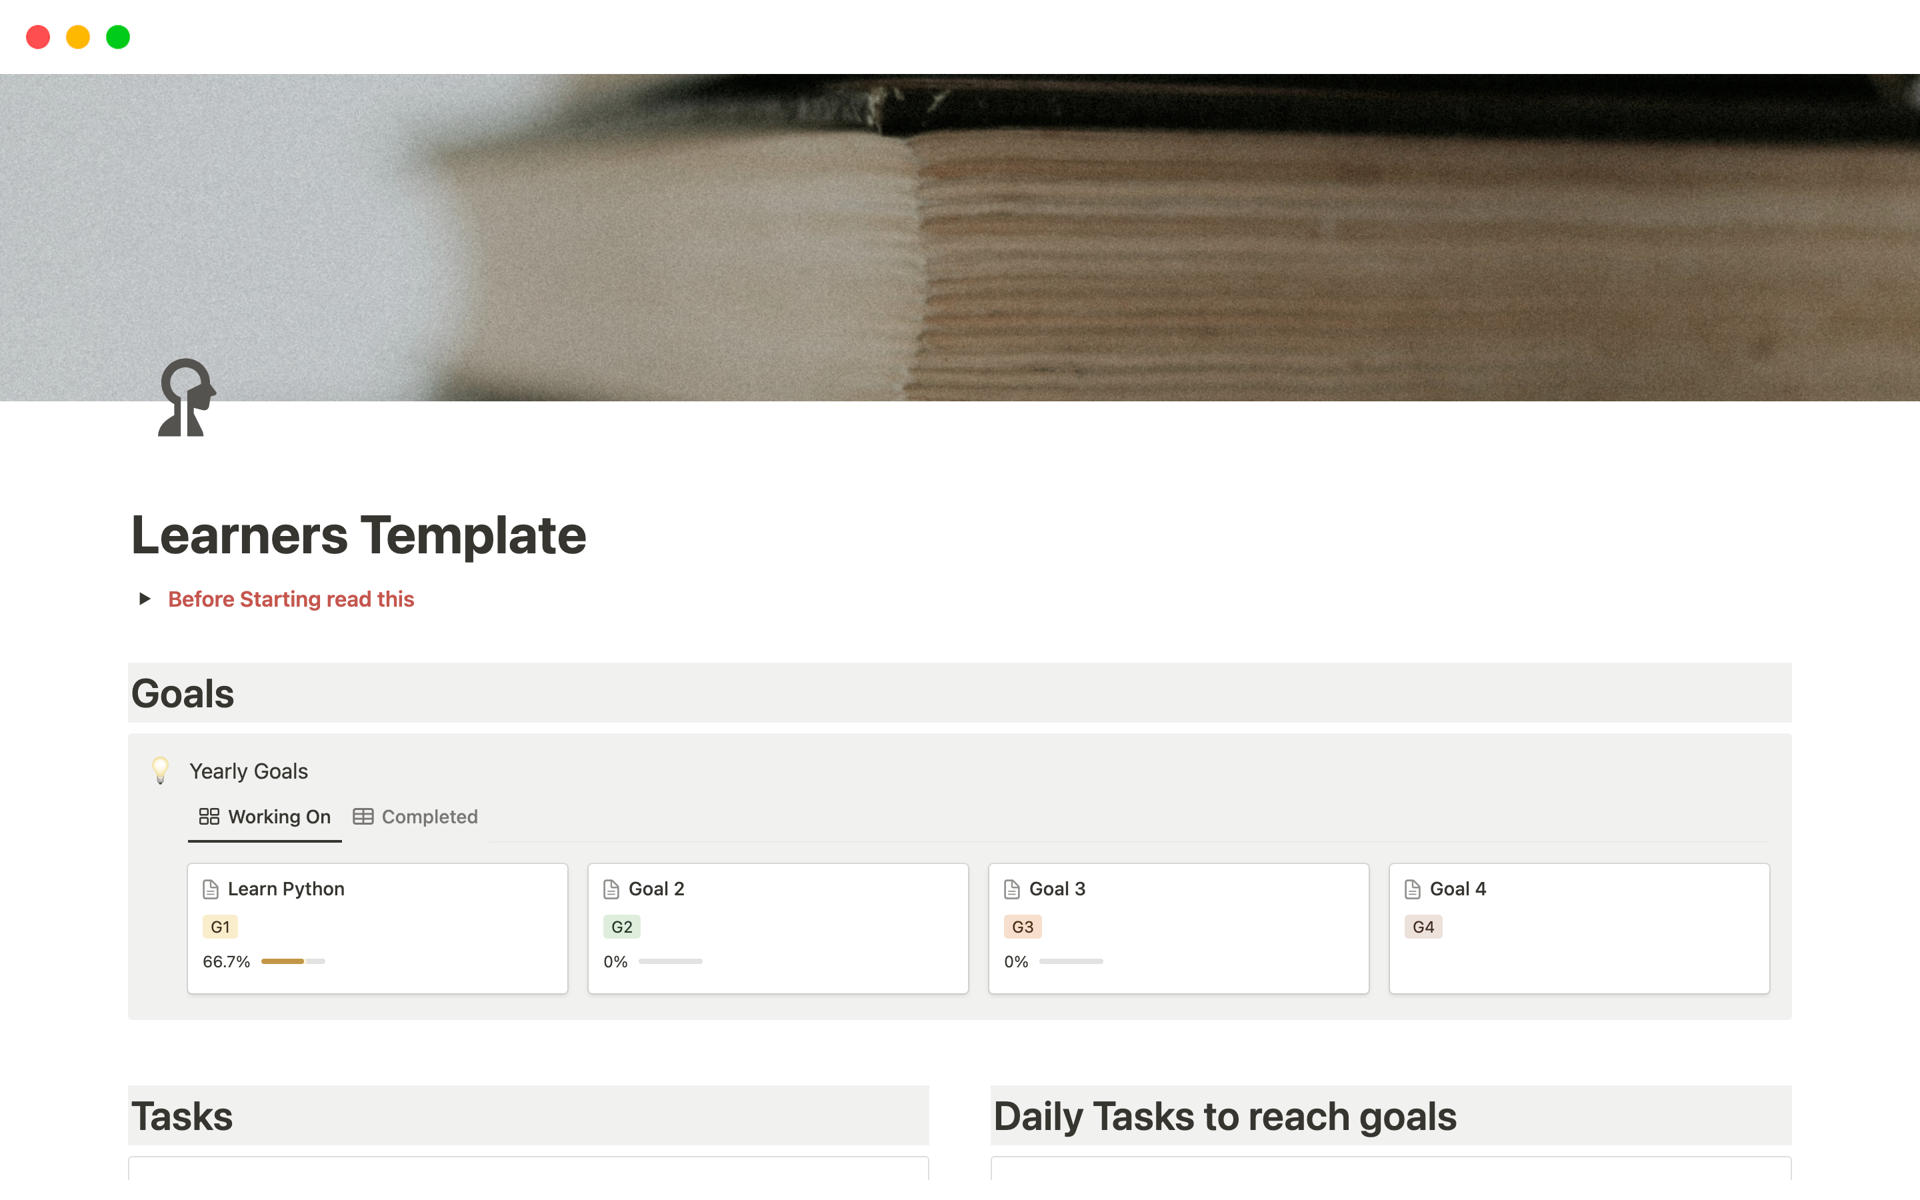 "Empower your learning journey with the Learner's Template - your all-in-one Notion resource for setting goals, tracking progress, and organizing valuable learning materials."